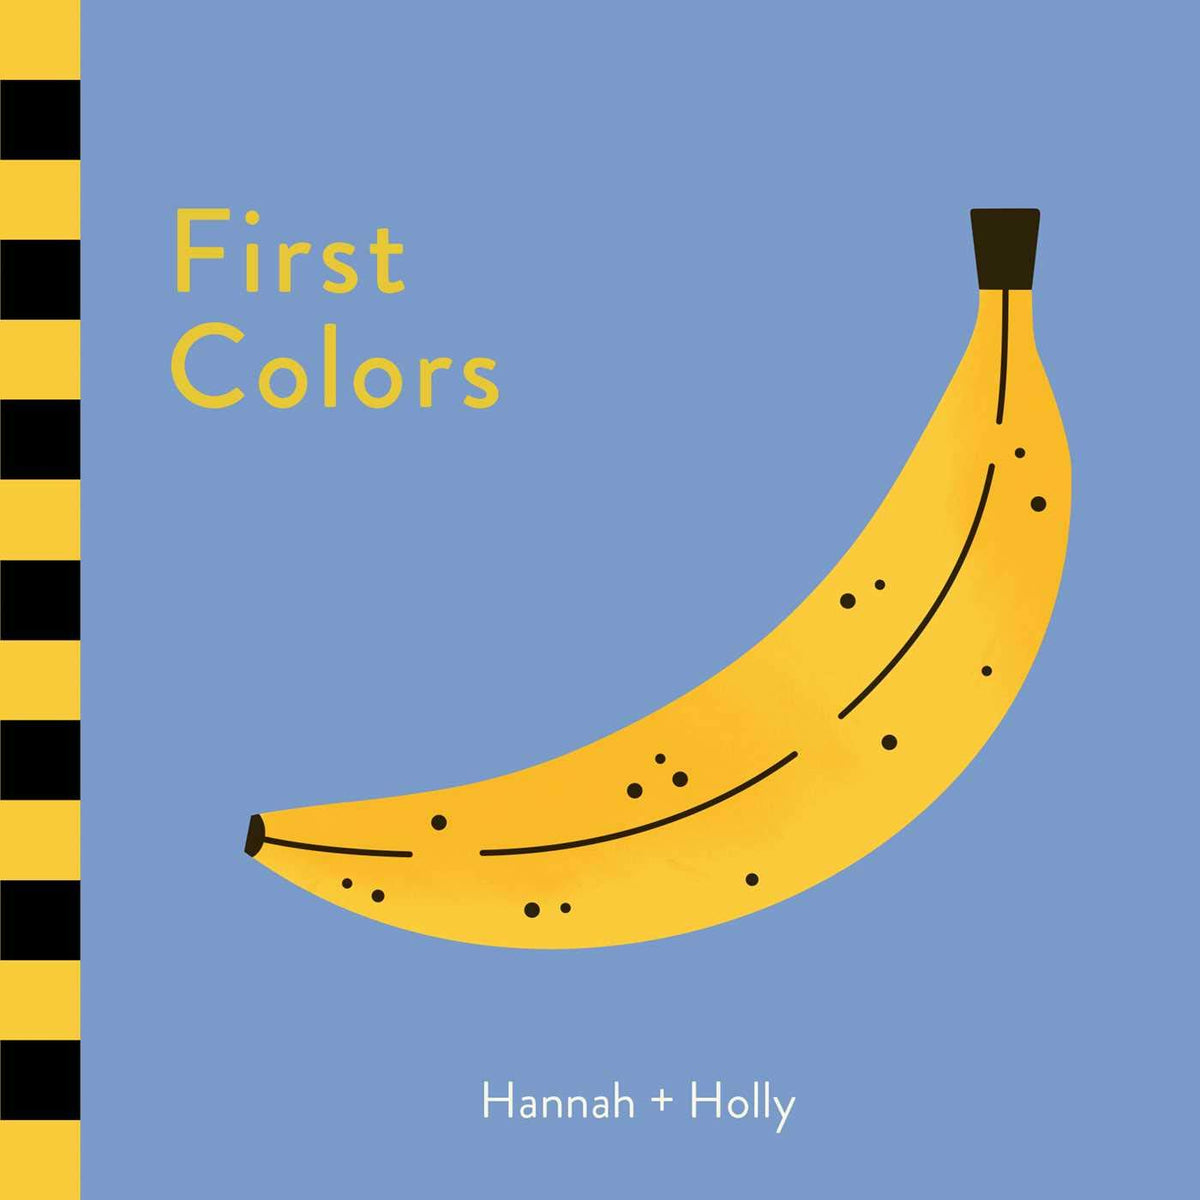 First Colors By Hannah + Holly